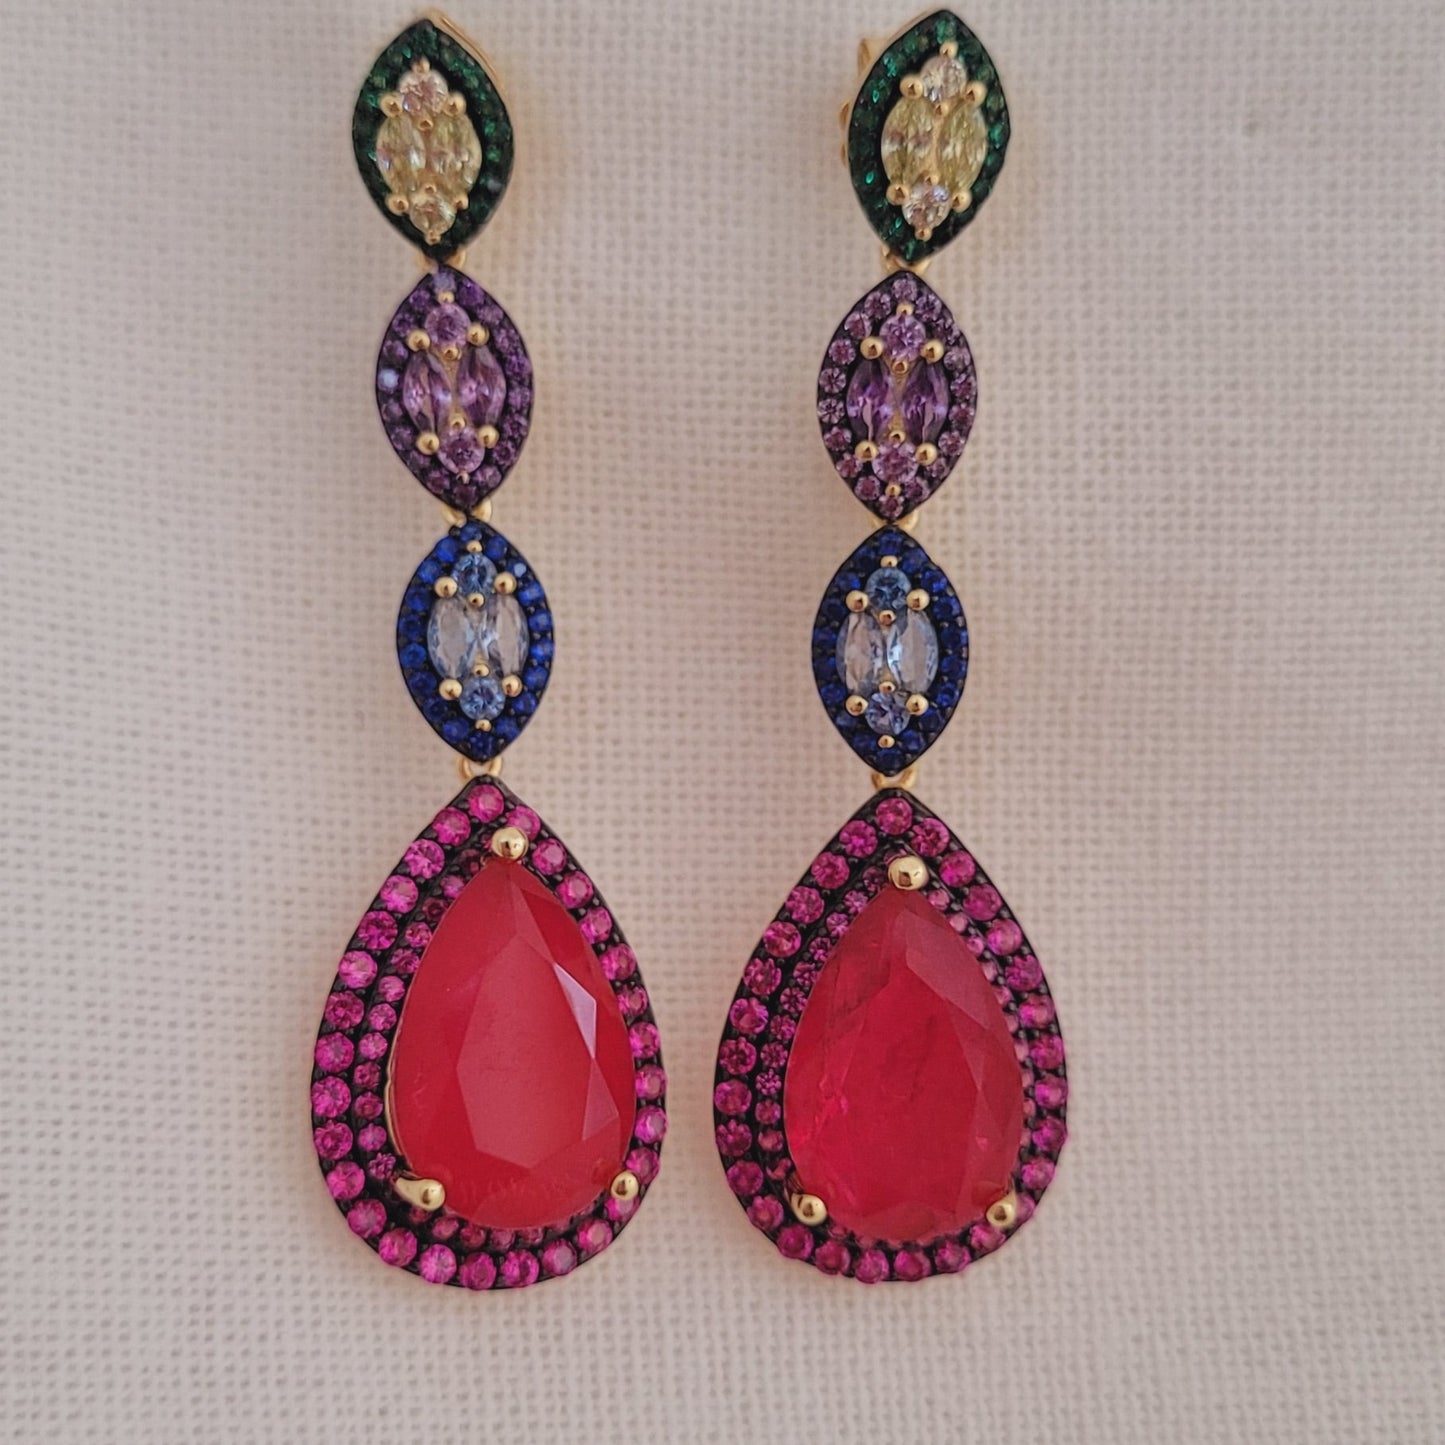 Colorful Lightweight Earrings. Princess inspired Jewelry-For any look-Fashion-Trendy-Original Design - Nelissima Jewelry